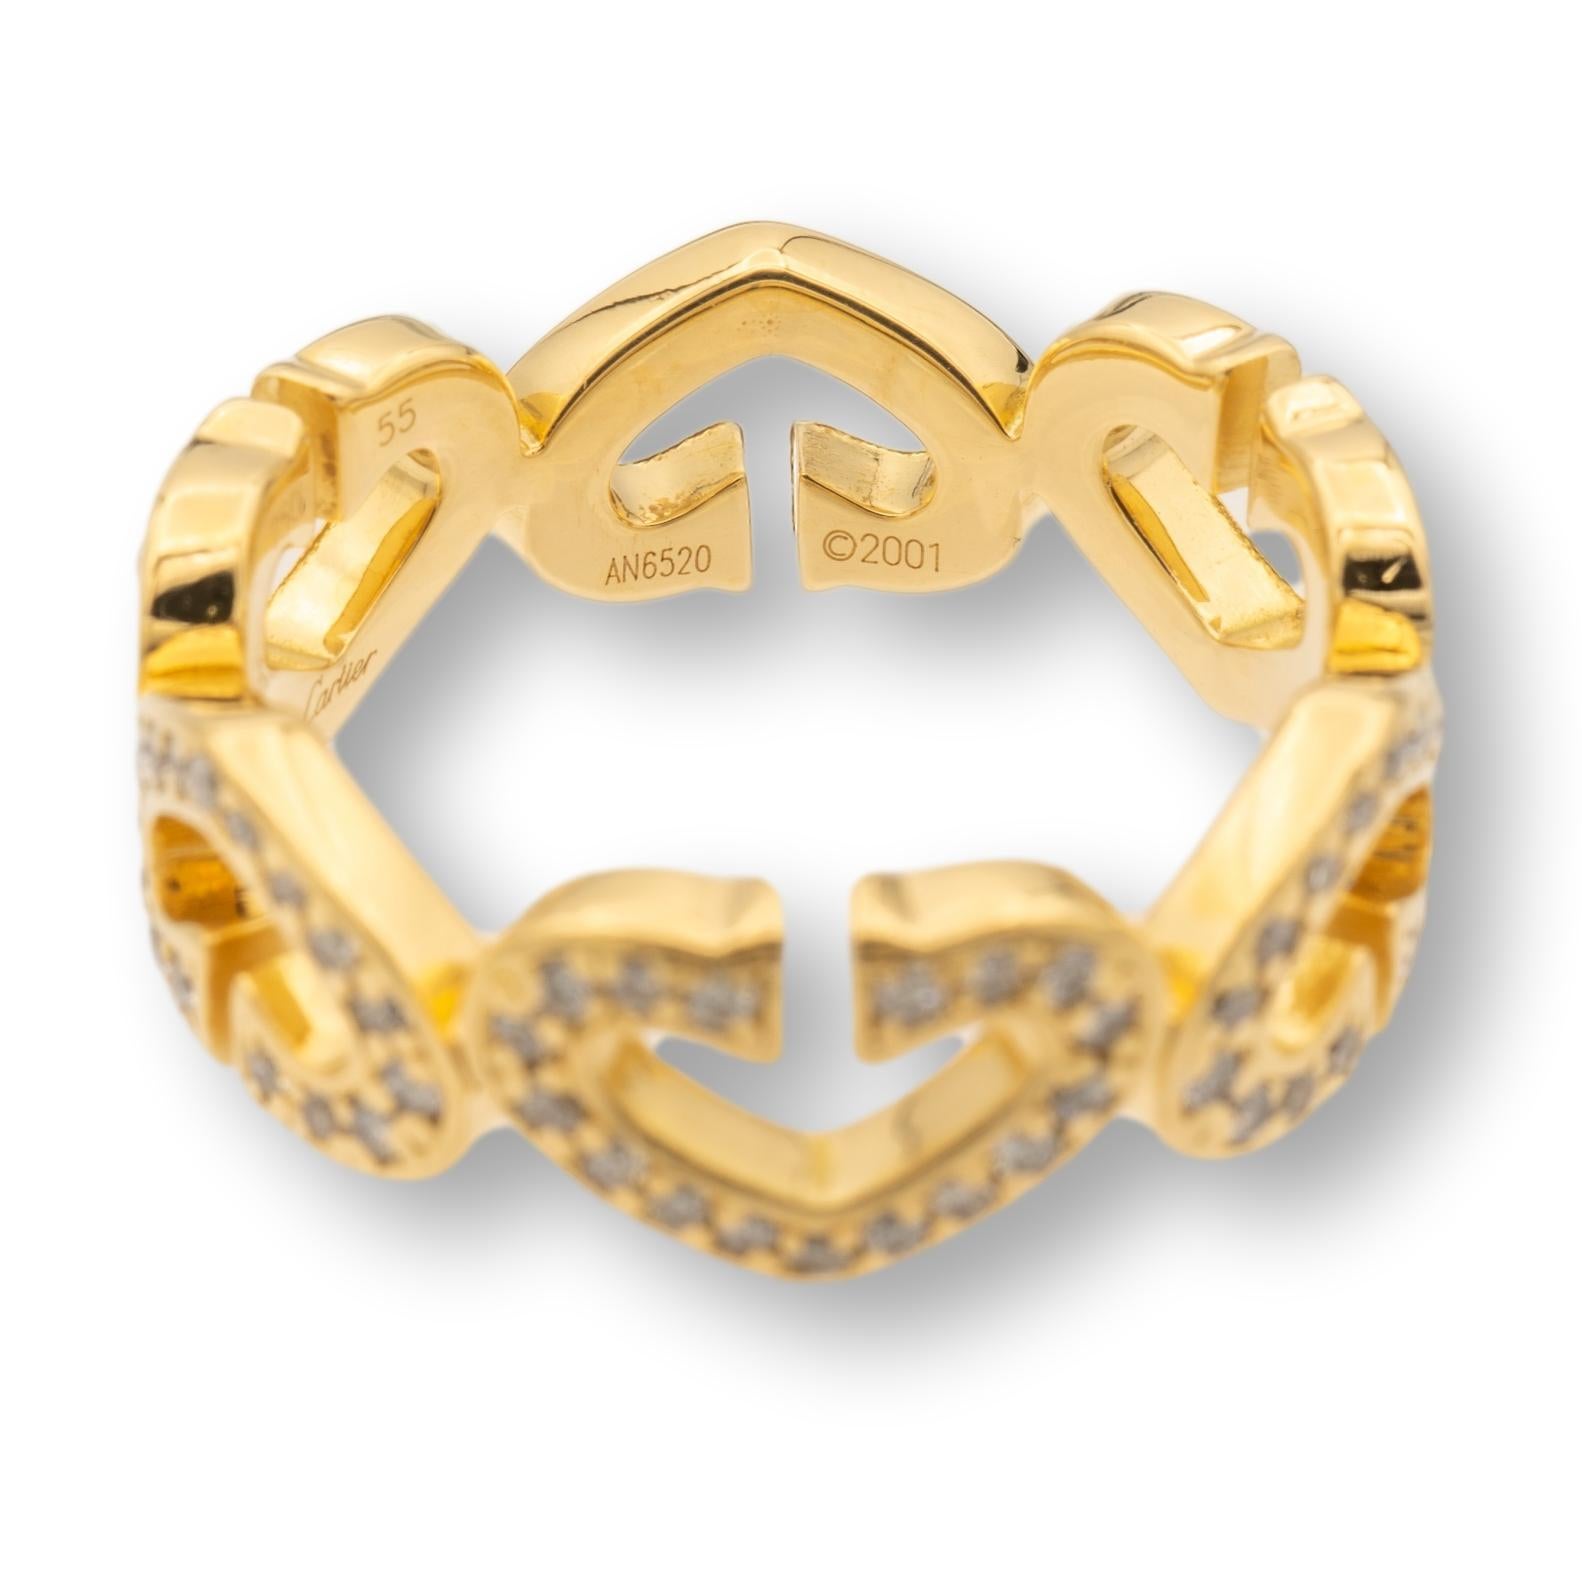 Cartier ring from the C de Cartier collection finely crafted in 18 karat yellow gold with pave diamonds set in six heart motifs going all the way around. Ring is fully hallmarked with Cartier serial numbers and metal content.

RING